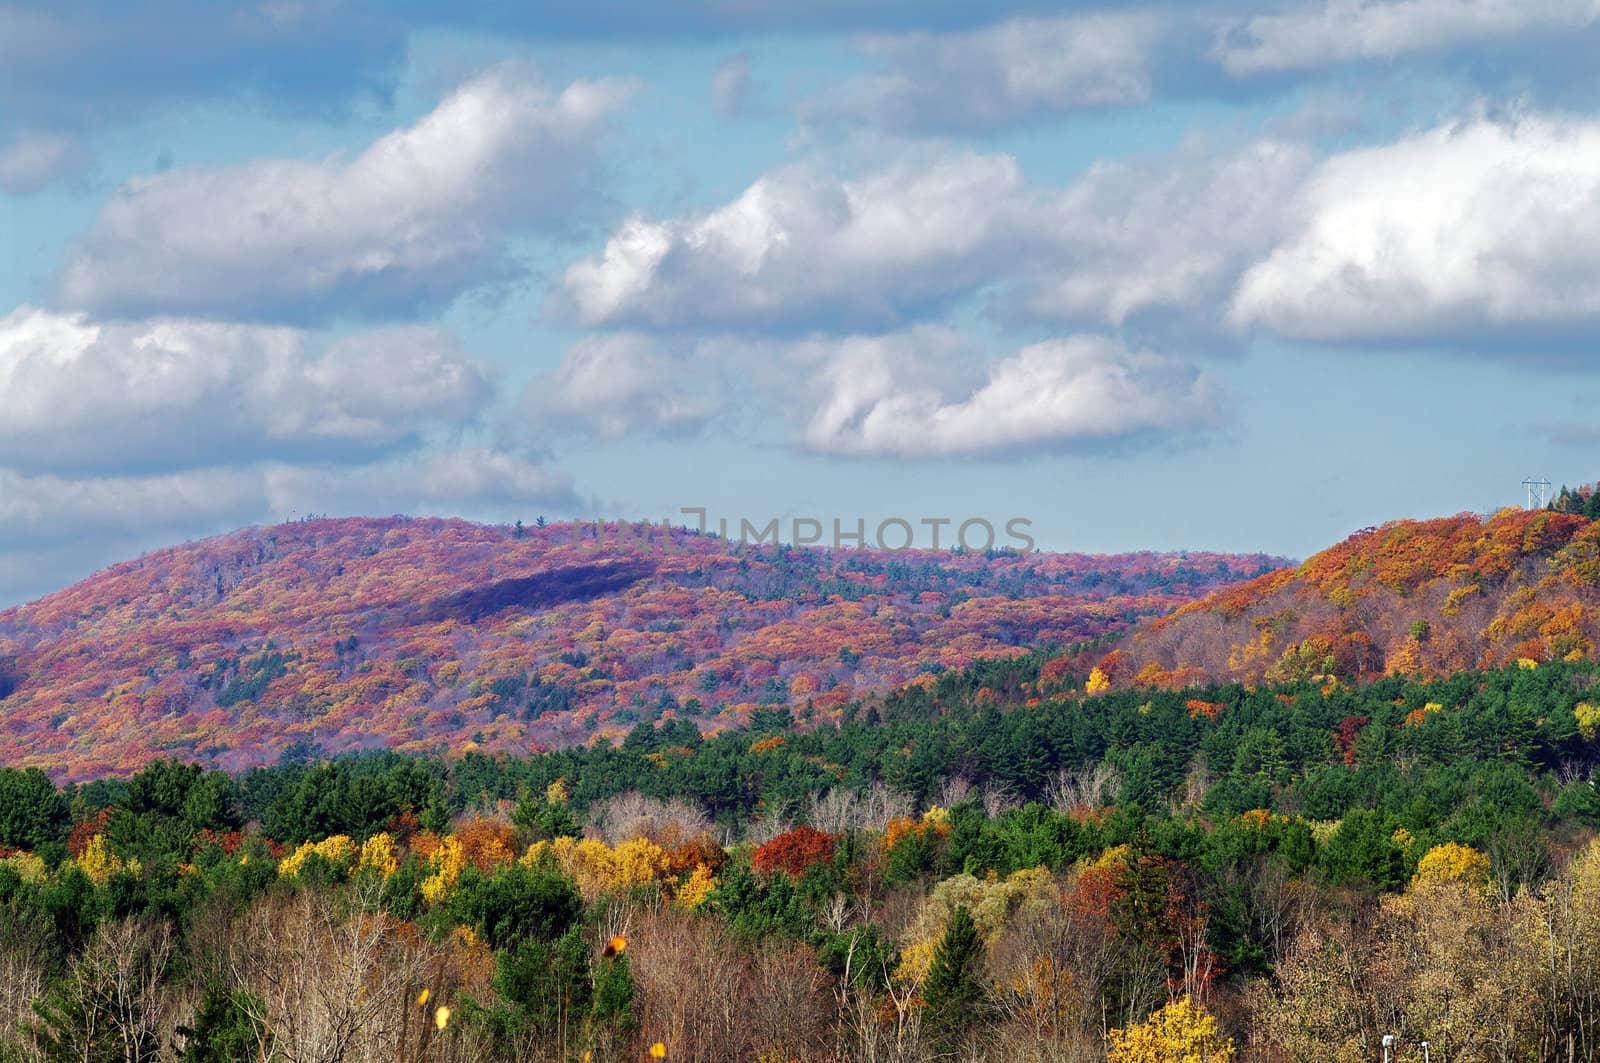 Fall Colours in Lee, Mass from a hill top